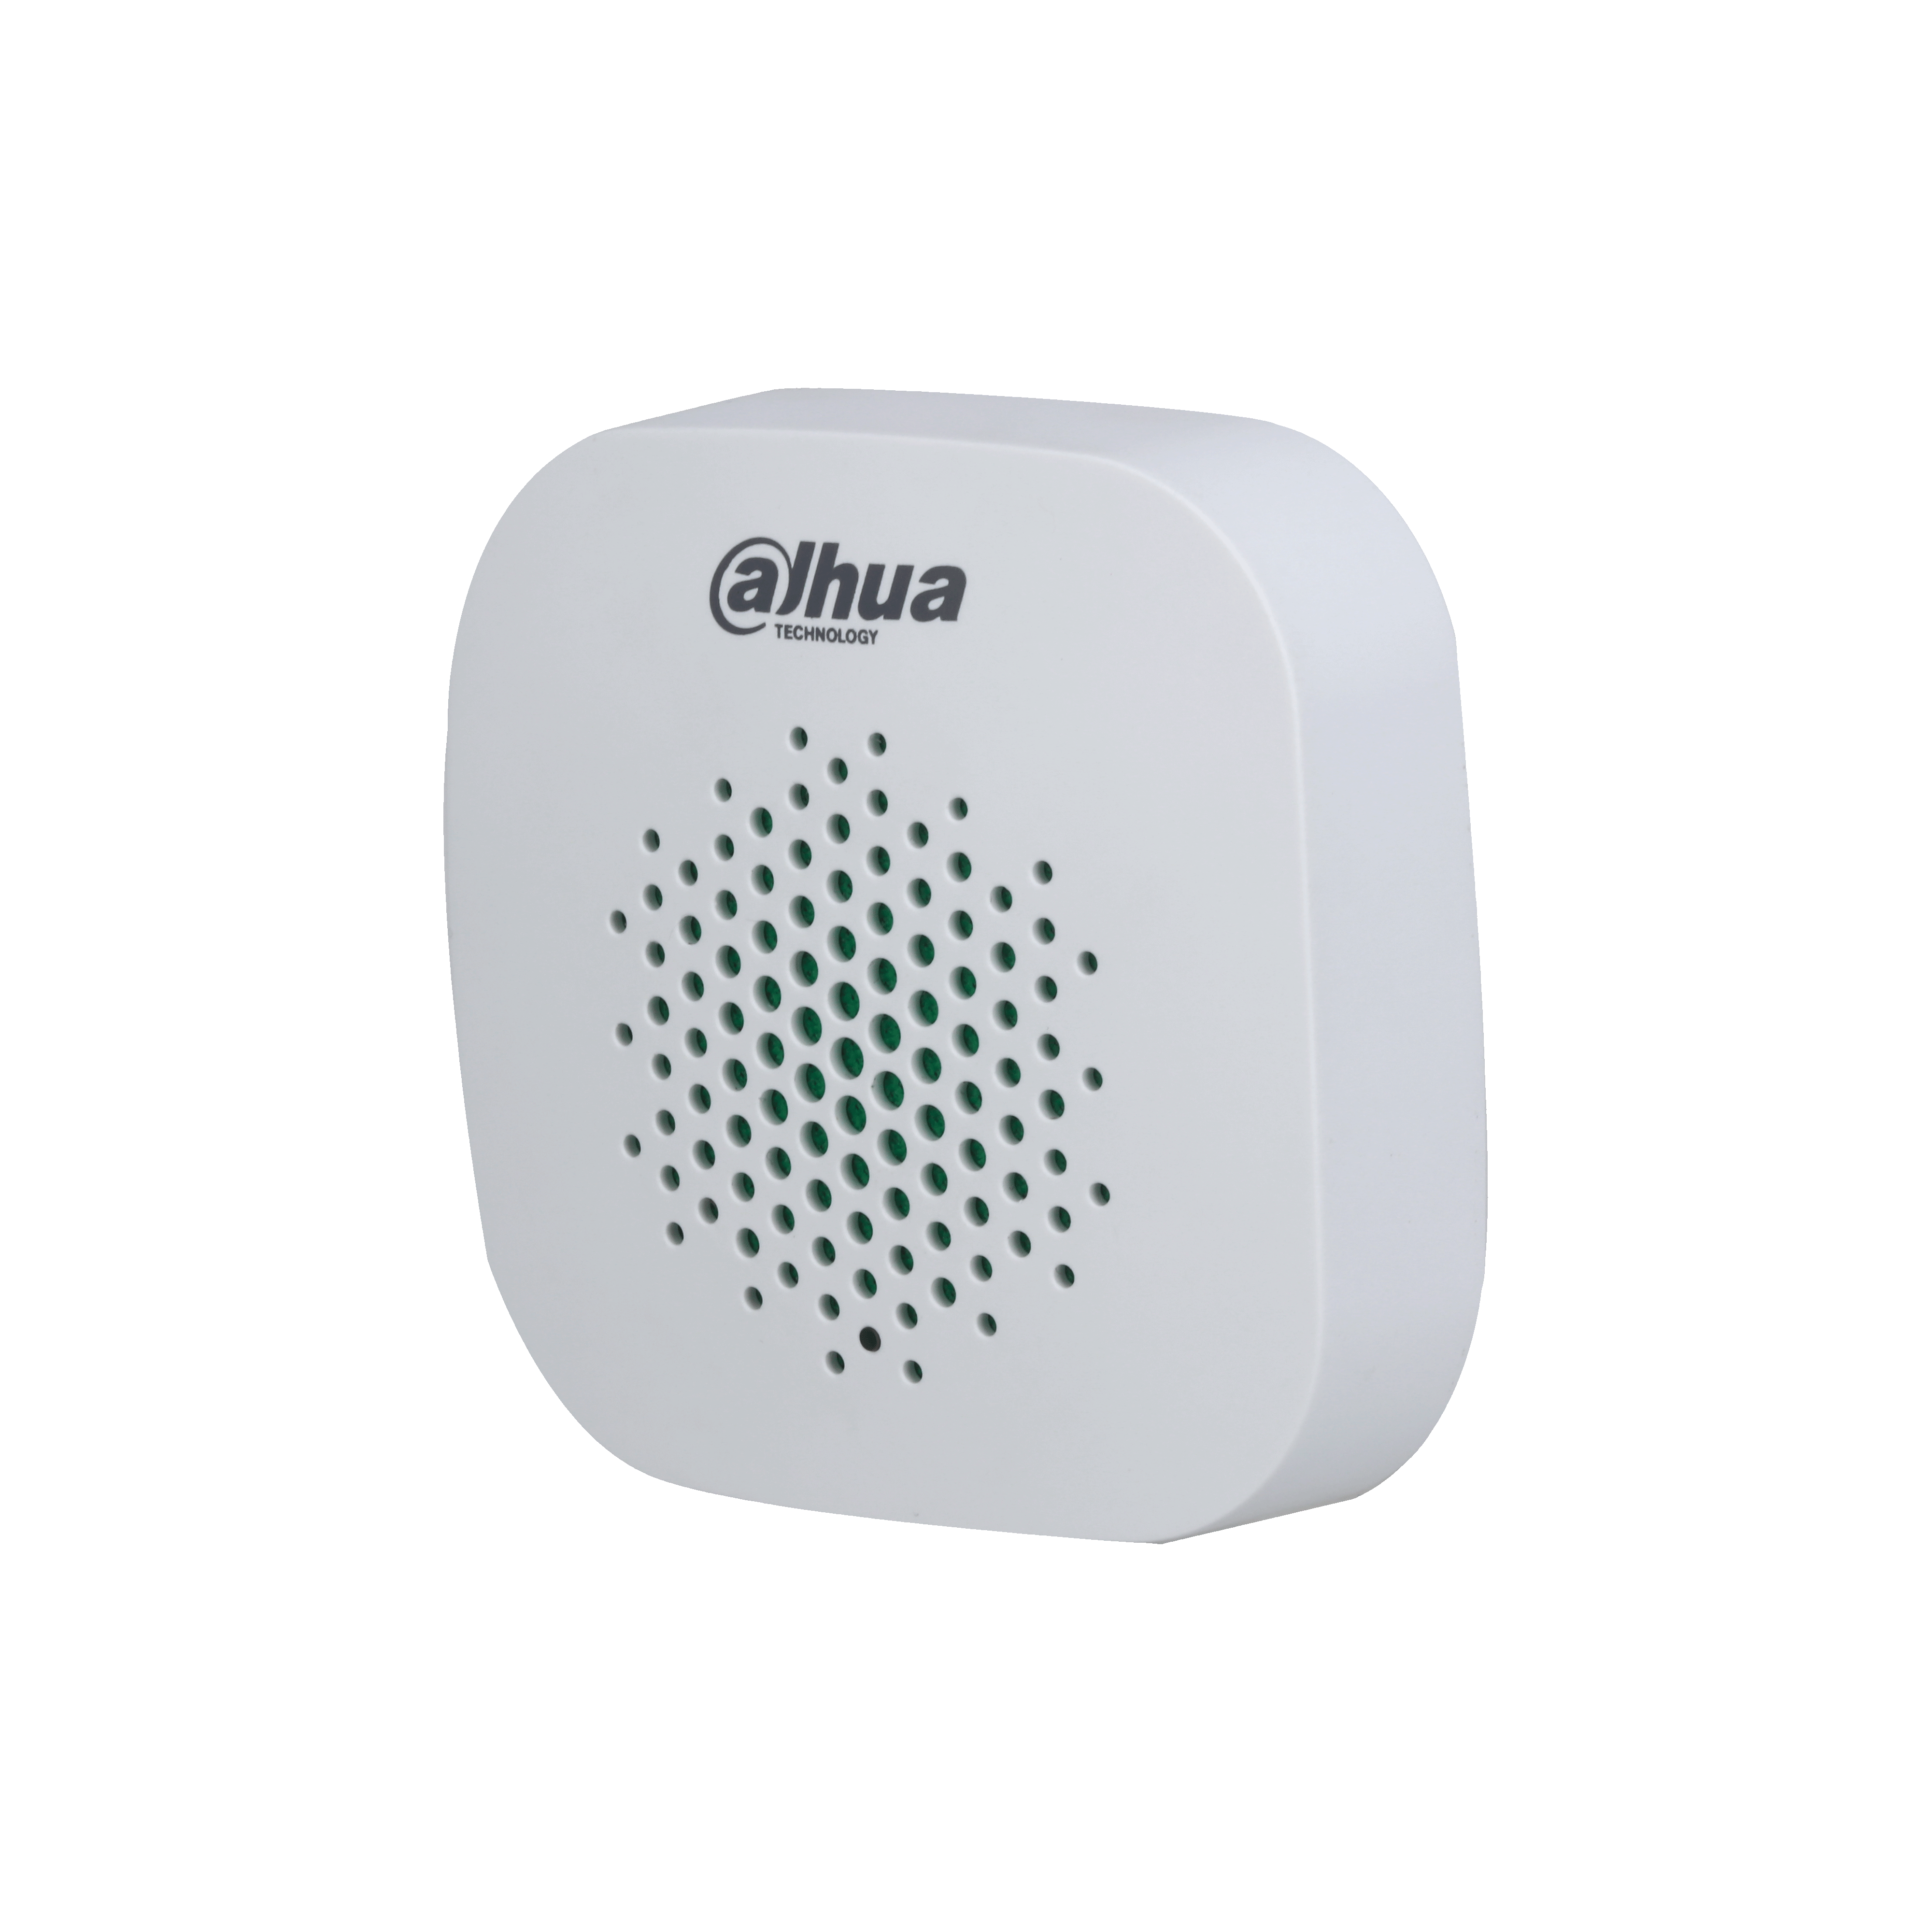 DHI-ARA12-W2 WIRELESS INDOOR SIREN WALL MOUNTED 433MHz 2 x CR123A BATTERIES (6.6V)